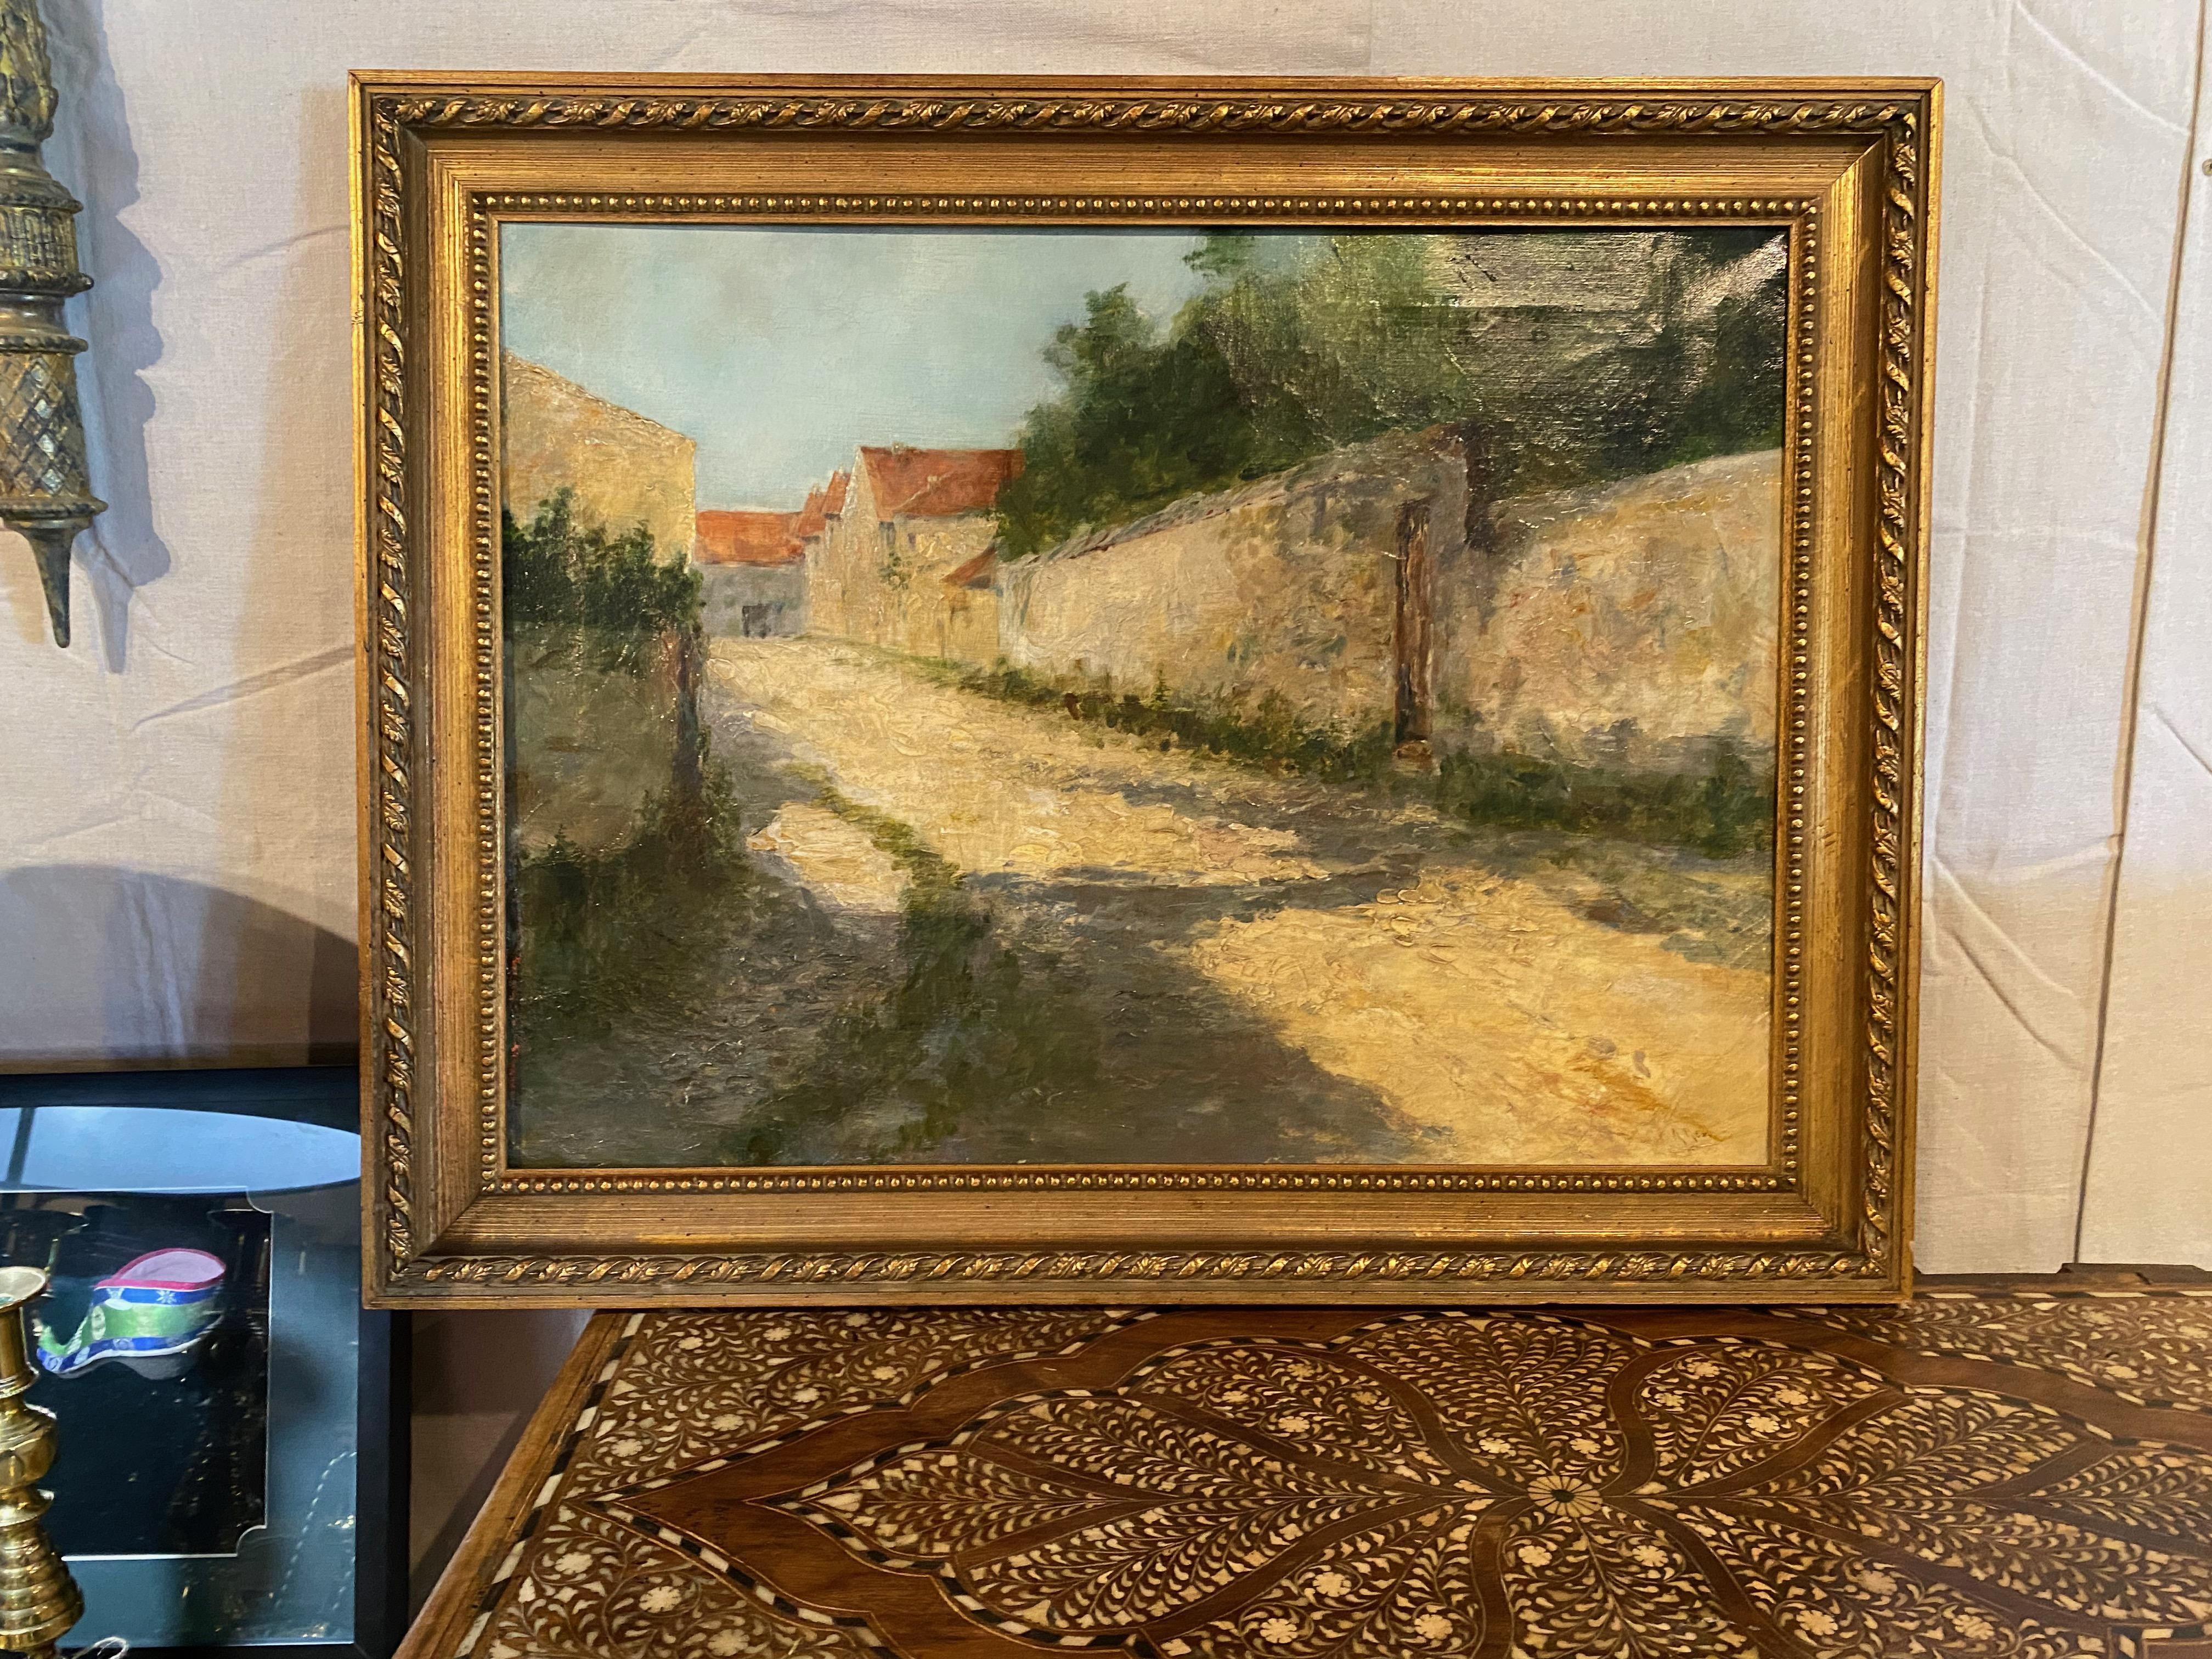 This is a charming Post-Impressionist painting of a late 19th century Italian village street. The painting is well-executed by a competent artist and is signed at lower right. The interplay of light and shadow leads the viewer to participate in the